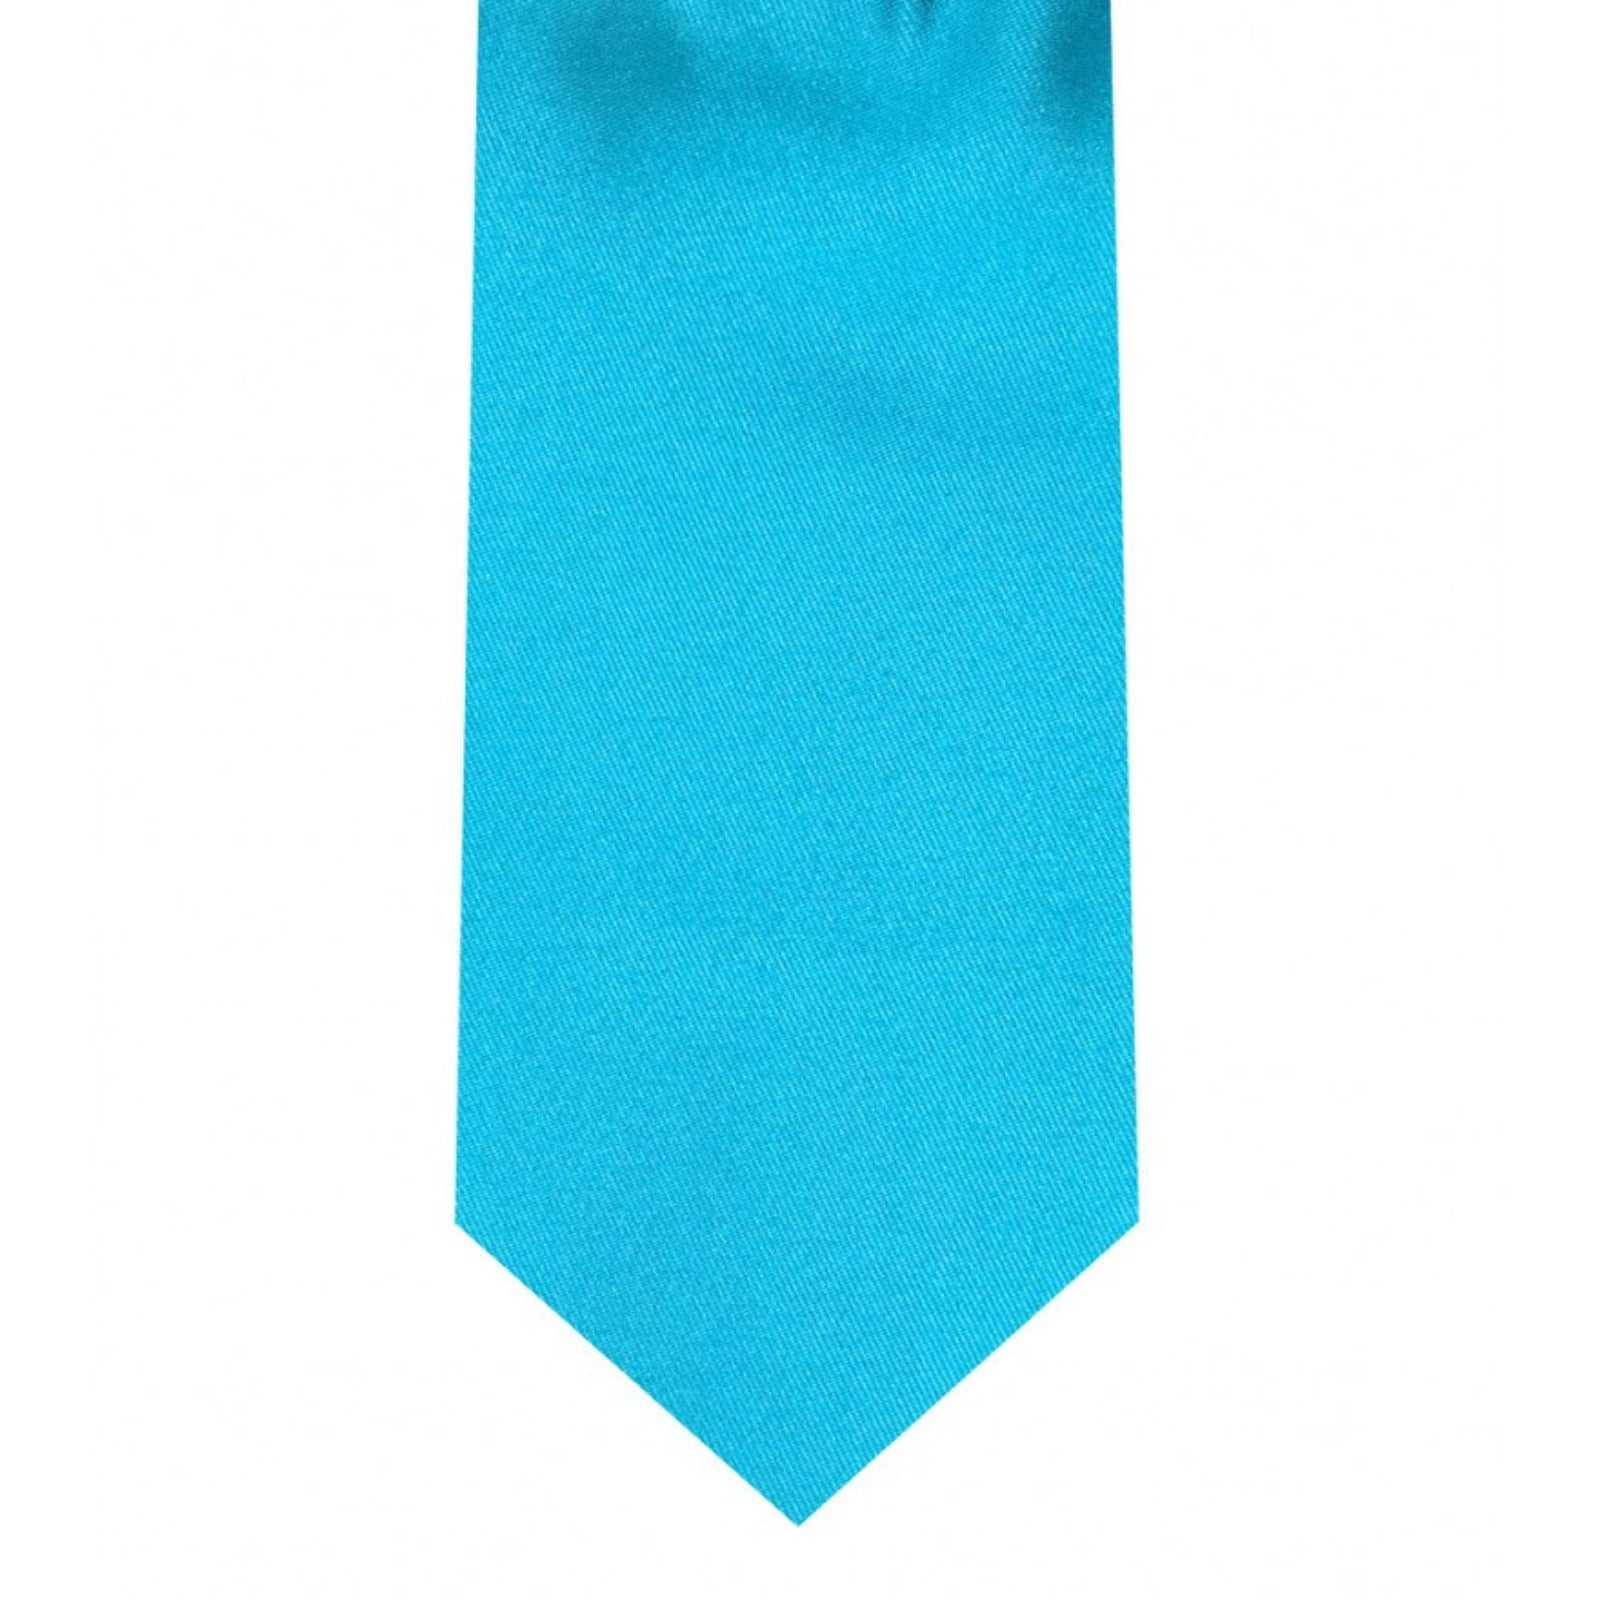 Classic Turquoise Tie Skinny width 2.75 inches With Matching Pocket Square | KCT Menswear